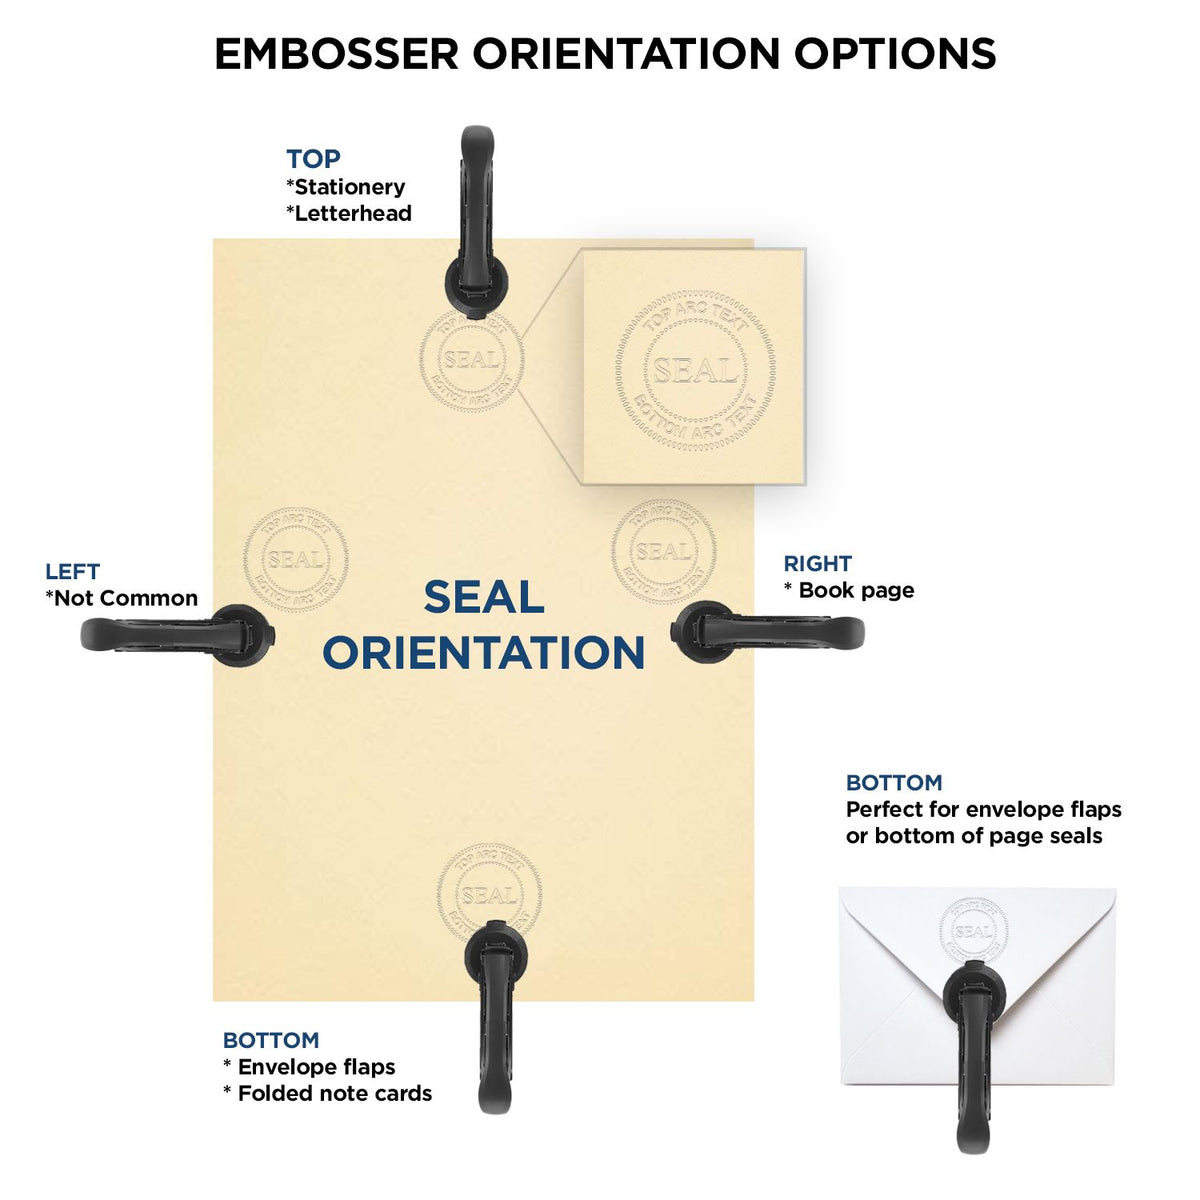 An infographic for the Heavy Duty Cast Iron Oklahoma Architect Embosser showing embosser orientation, this is showing examples of a top, bottom, right and left insert.